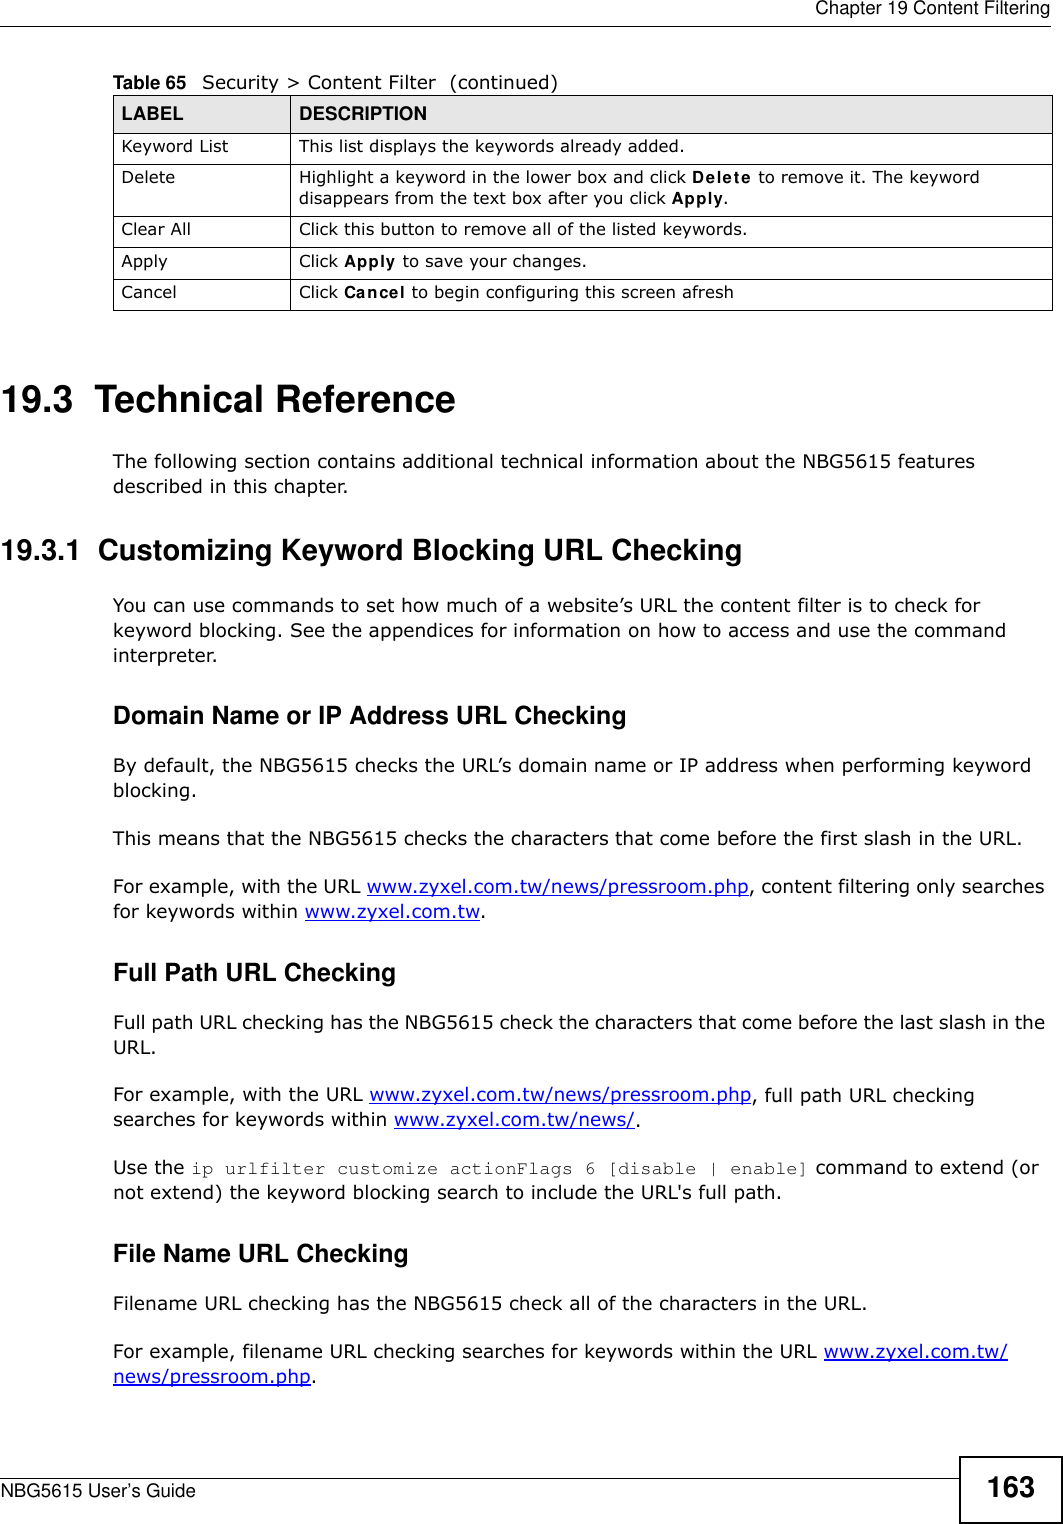  Chapter 19 Content FilteringNBG5615 User’s Guide 16319.3  Technical ReferenceThe following section contains additional technical information about the NBG5615 features described in this chapter.19.3.1  Customizing Keyword Blocking URL CheckingYou can use commands to set how much of a website’s URL the content filter is to check for keyword blocking. See the appendices for information on how to access and use the command interpreter.Domain Name or IP Address URL CheckingBy default, the NBG5615 checks the URL’s domain name or IP address when performing keyword blocking.This means that the NBG5615 checks the characters that come before the first slash in the URL.For example, with the URL www.zyxel.com.tw/news/pressroom.php, content filtering only searches for keywords within www.zyxel.com.tw.Full Path URL CheckingFull path URL checking has the NBG5615 check the characters that come before the last slash in the URL.For example, with the URL www.zyxel.com.tw/news/pressroom.php, full path URL checking searches for keywords within www.zyxel.com.tw/news/.Use the ip urlfilter customize actionFlags 6 [disable | enable] command to extend (or not extend) the keyword blocking search to include the URL&apos;s full path.File Name URL CheckingFilename URL checking has the NBG5615 check all of the characters in the URL.For example, filename URL checking searches for keywords within the URL www.zyxel.com.tw/news/pressroom.php.Keyword List This list displays the keywords already added. Delete Highlight a keyword in the lower box and click Delete to remove it. The keyword disappears from the text box after you click Apply.Clear All Click this button to remove all of the listed keywords.Apply Click Apply to save your changes.Cancel Click Cancel to begin configuring this screen afreshTable 65   Security &gt; Content Filter  (continued)LABEL DESCRIPTION